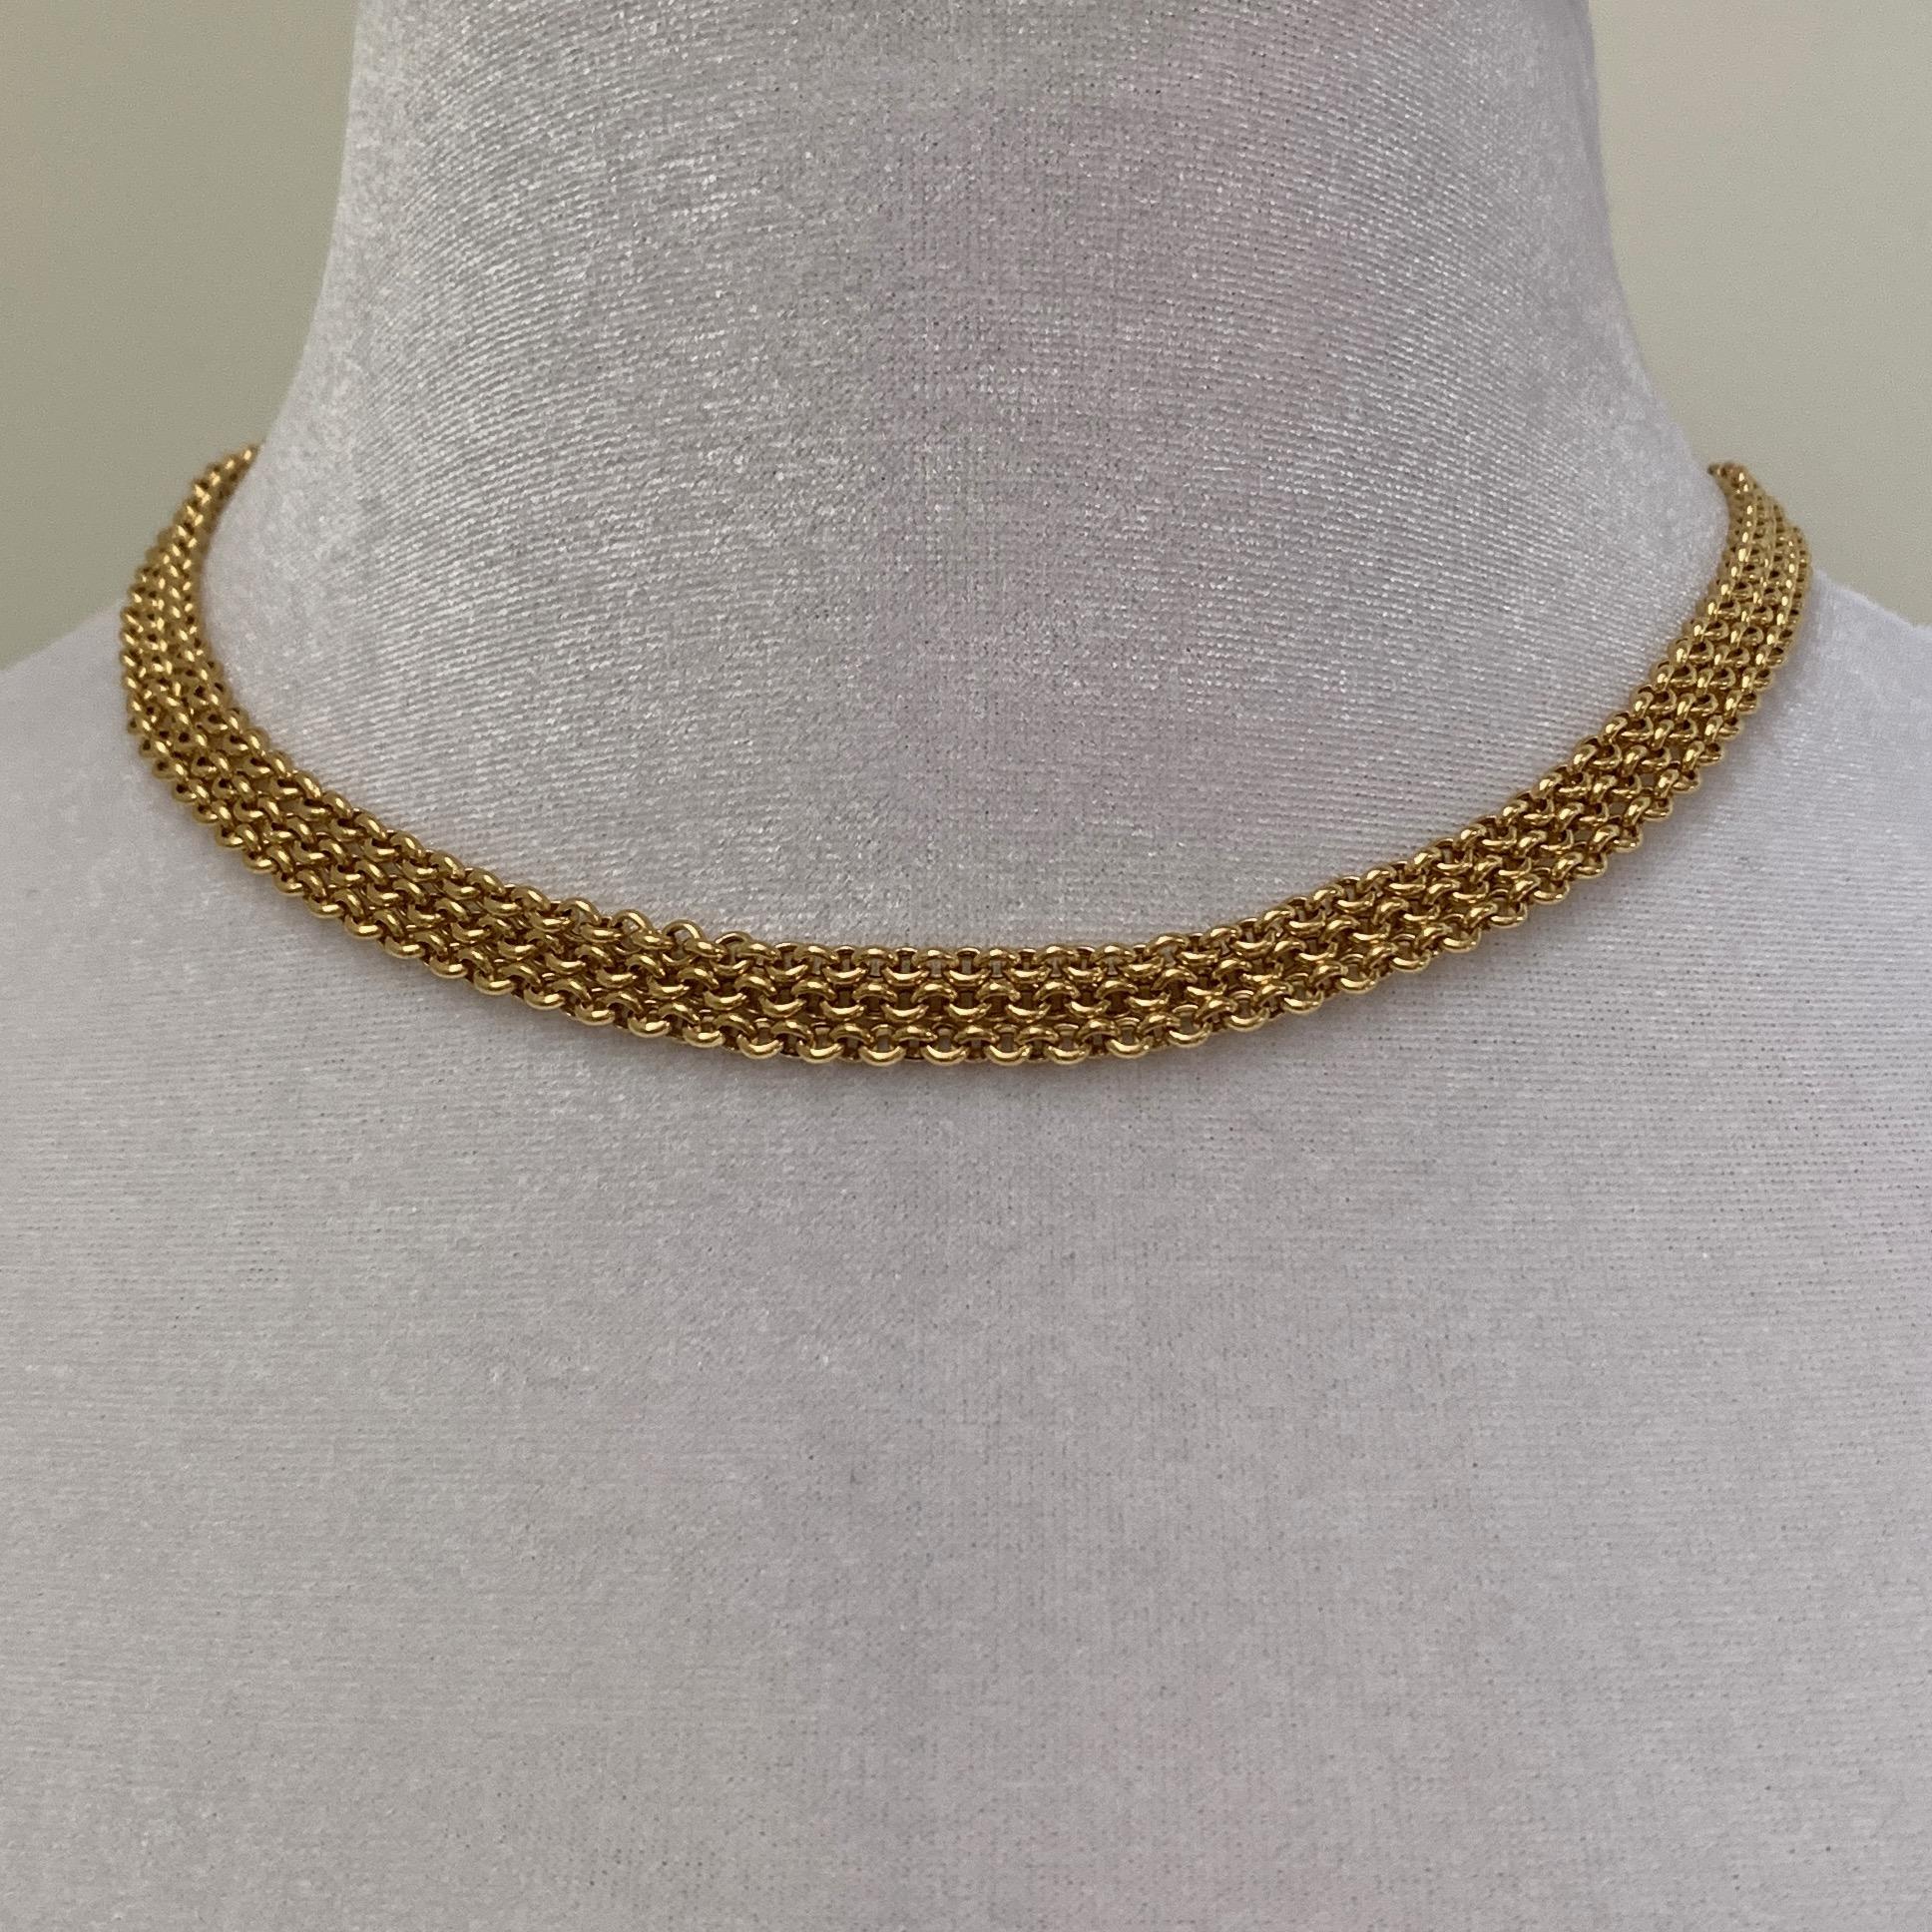 Contemporary Choker Length Triple Rolo Chain with Bolt Ring Closure in 18 Karat Yellow Gold